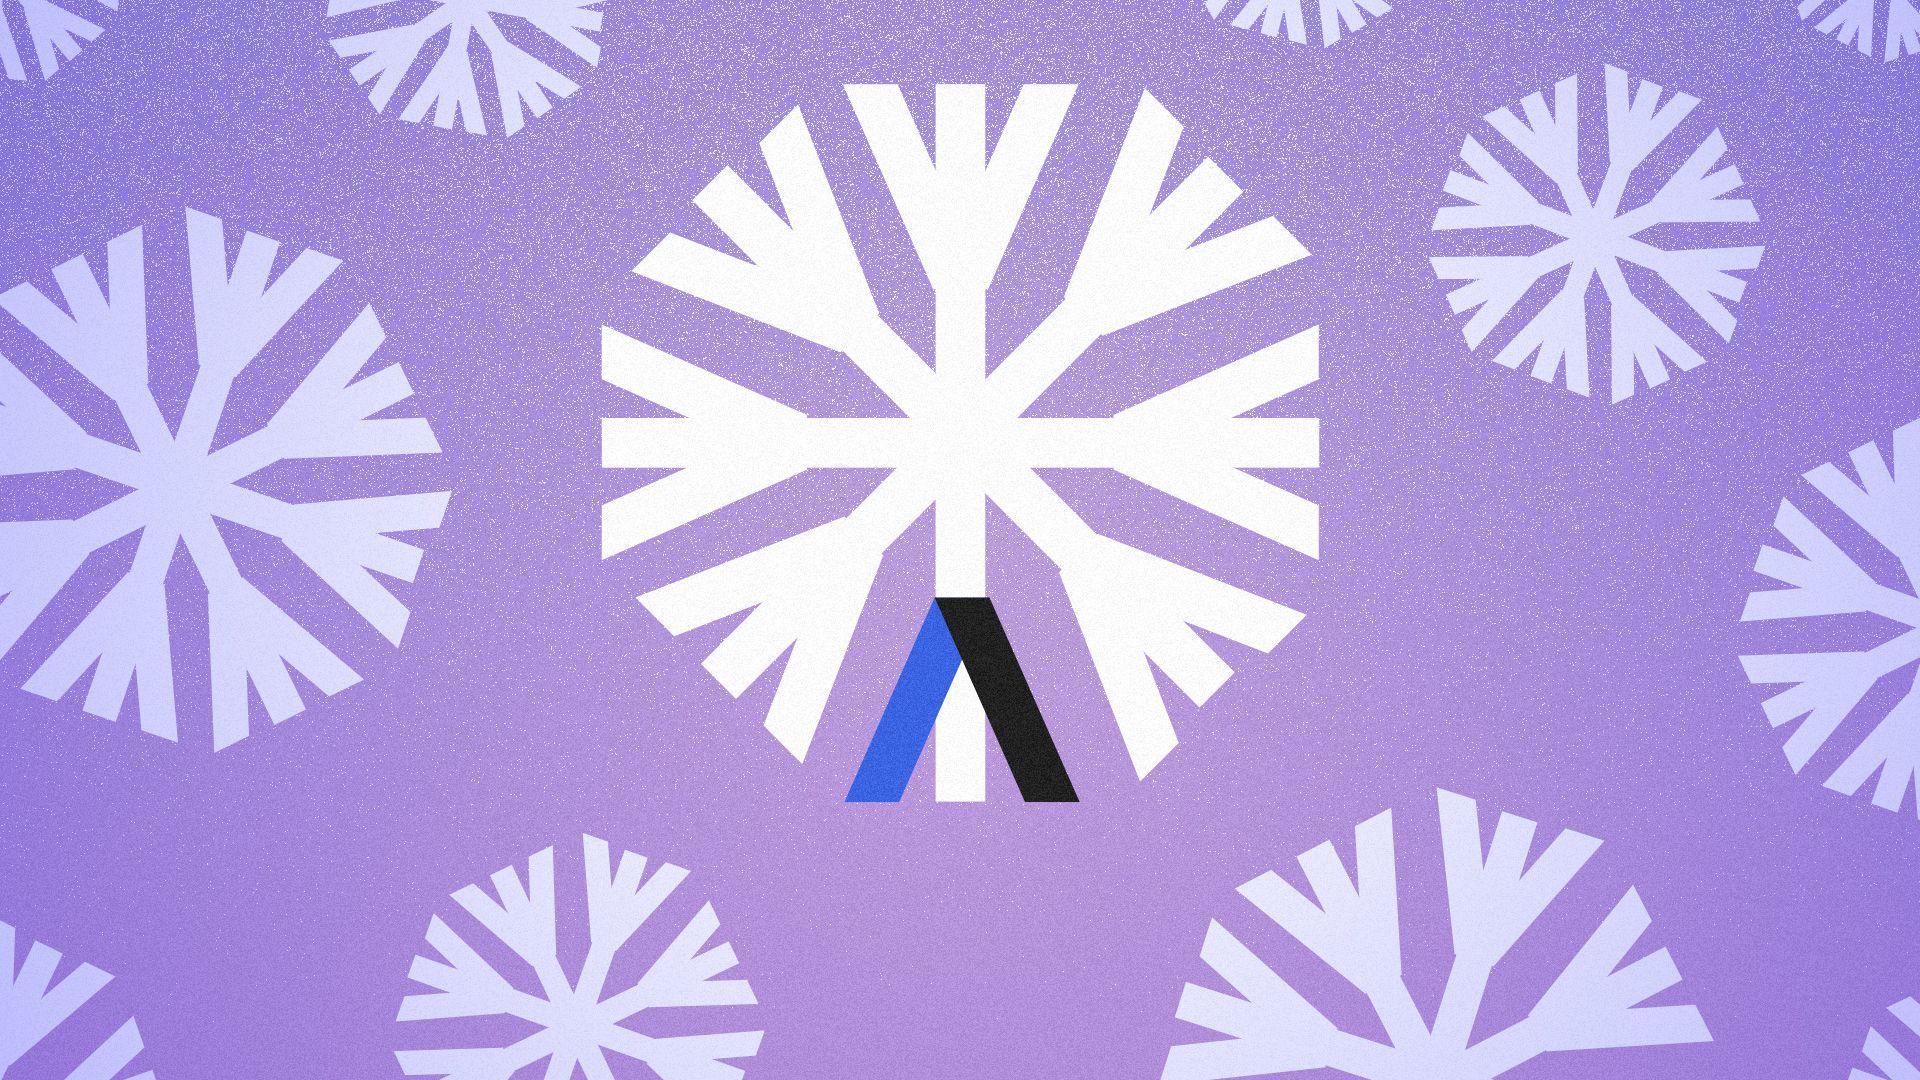 Illustration of snowflakes falling; one has the Axios logo.